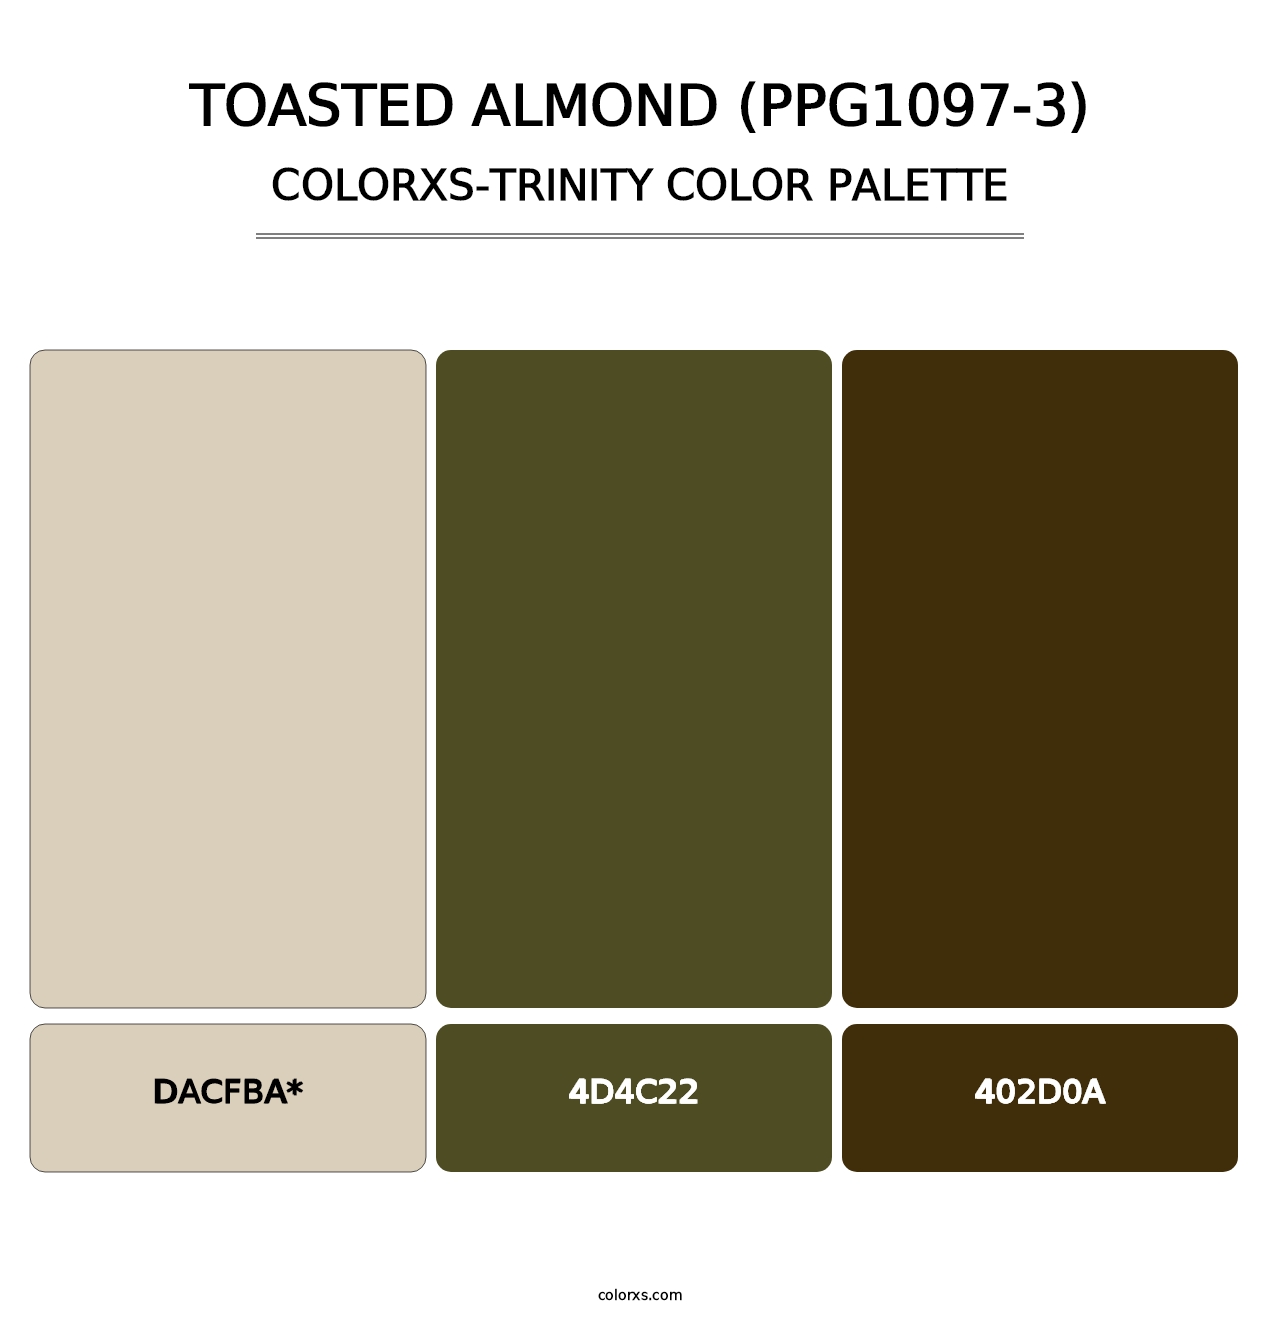 Toasted Almond (PPG1097-3) - Colorxs Trinity Palette